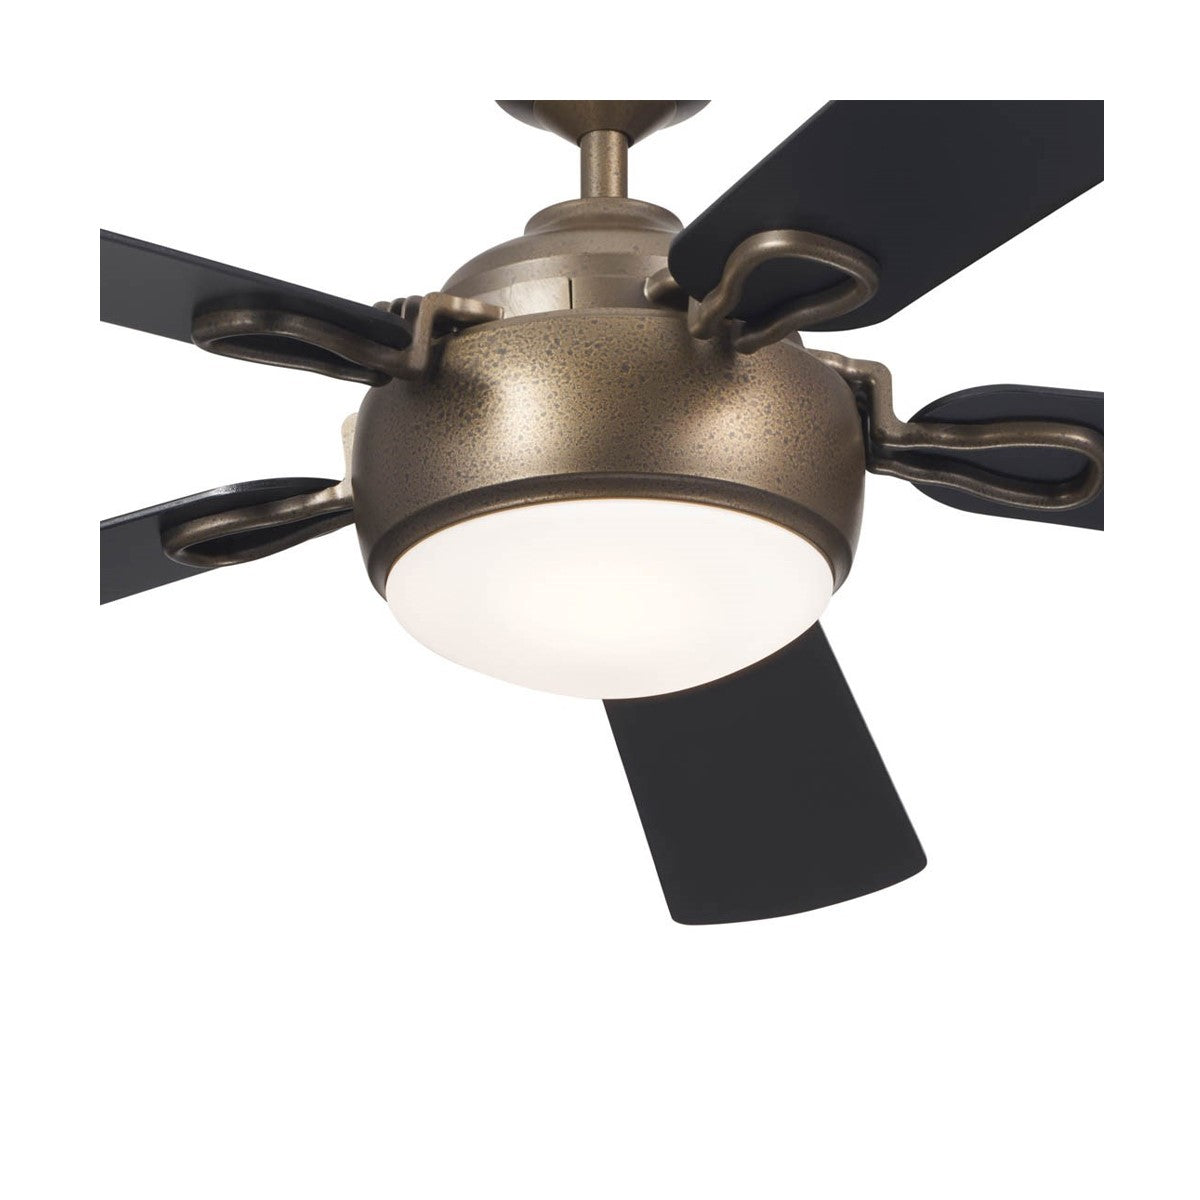 Humble 60 Inch Ceiling Fan With Light, Wall Control Included